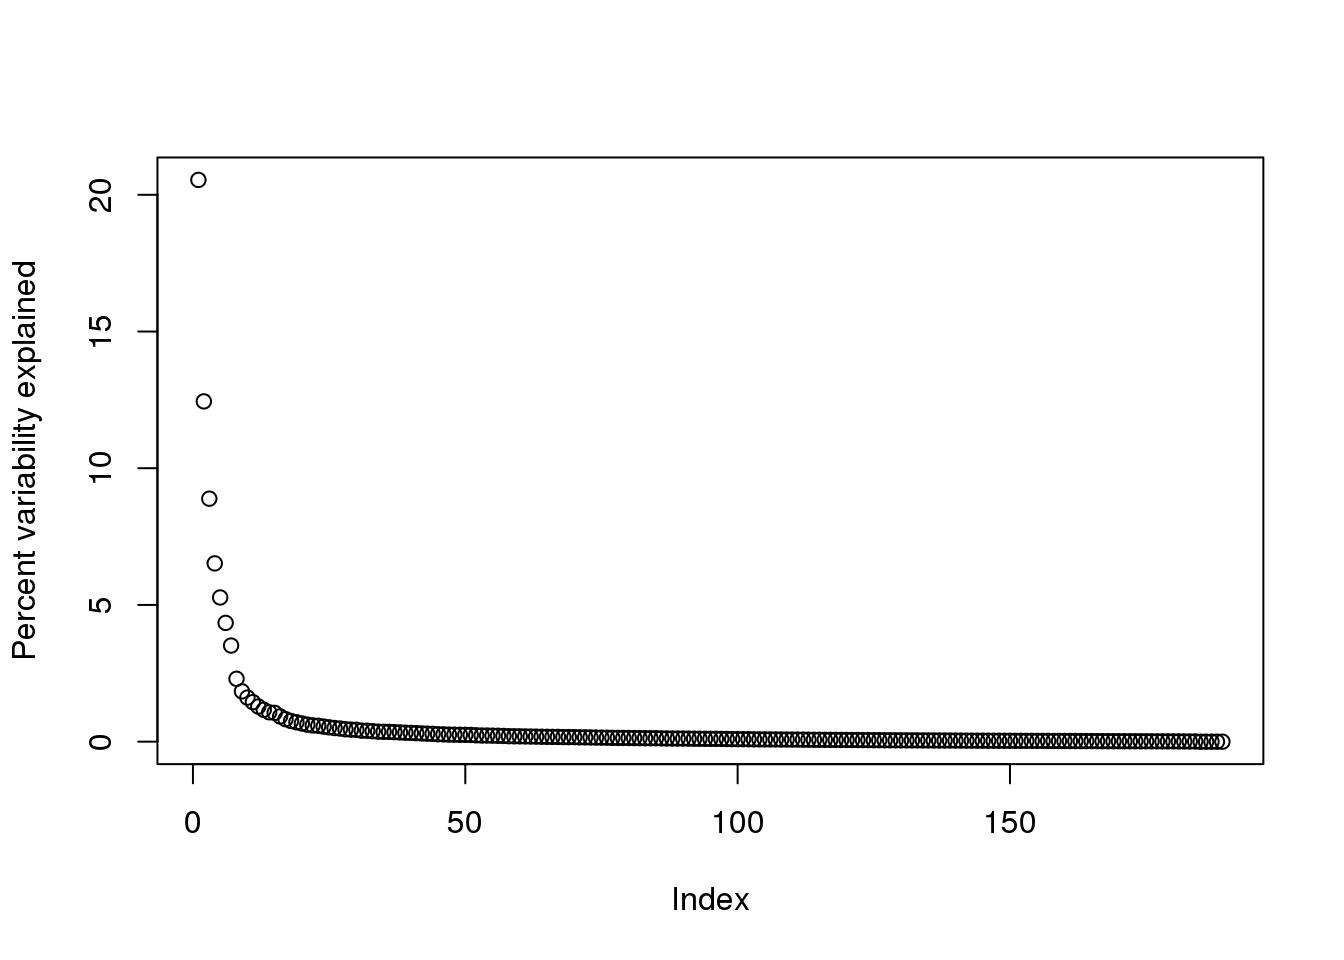 Percent variance explained by each principal component of gene expression data.